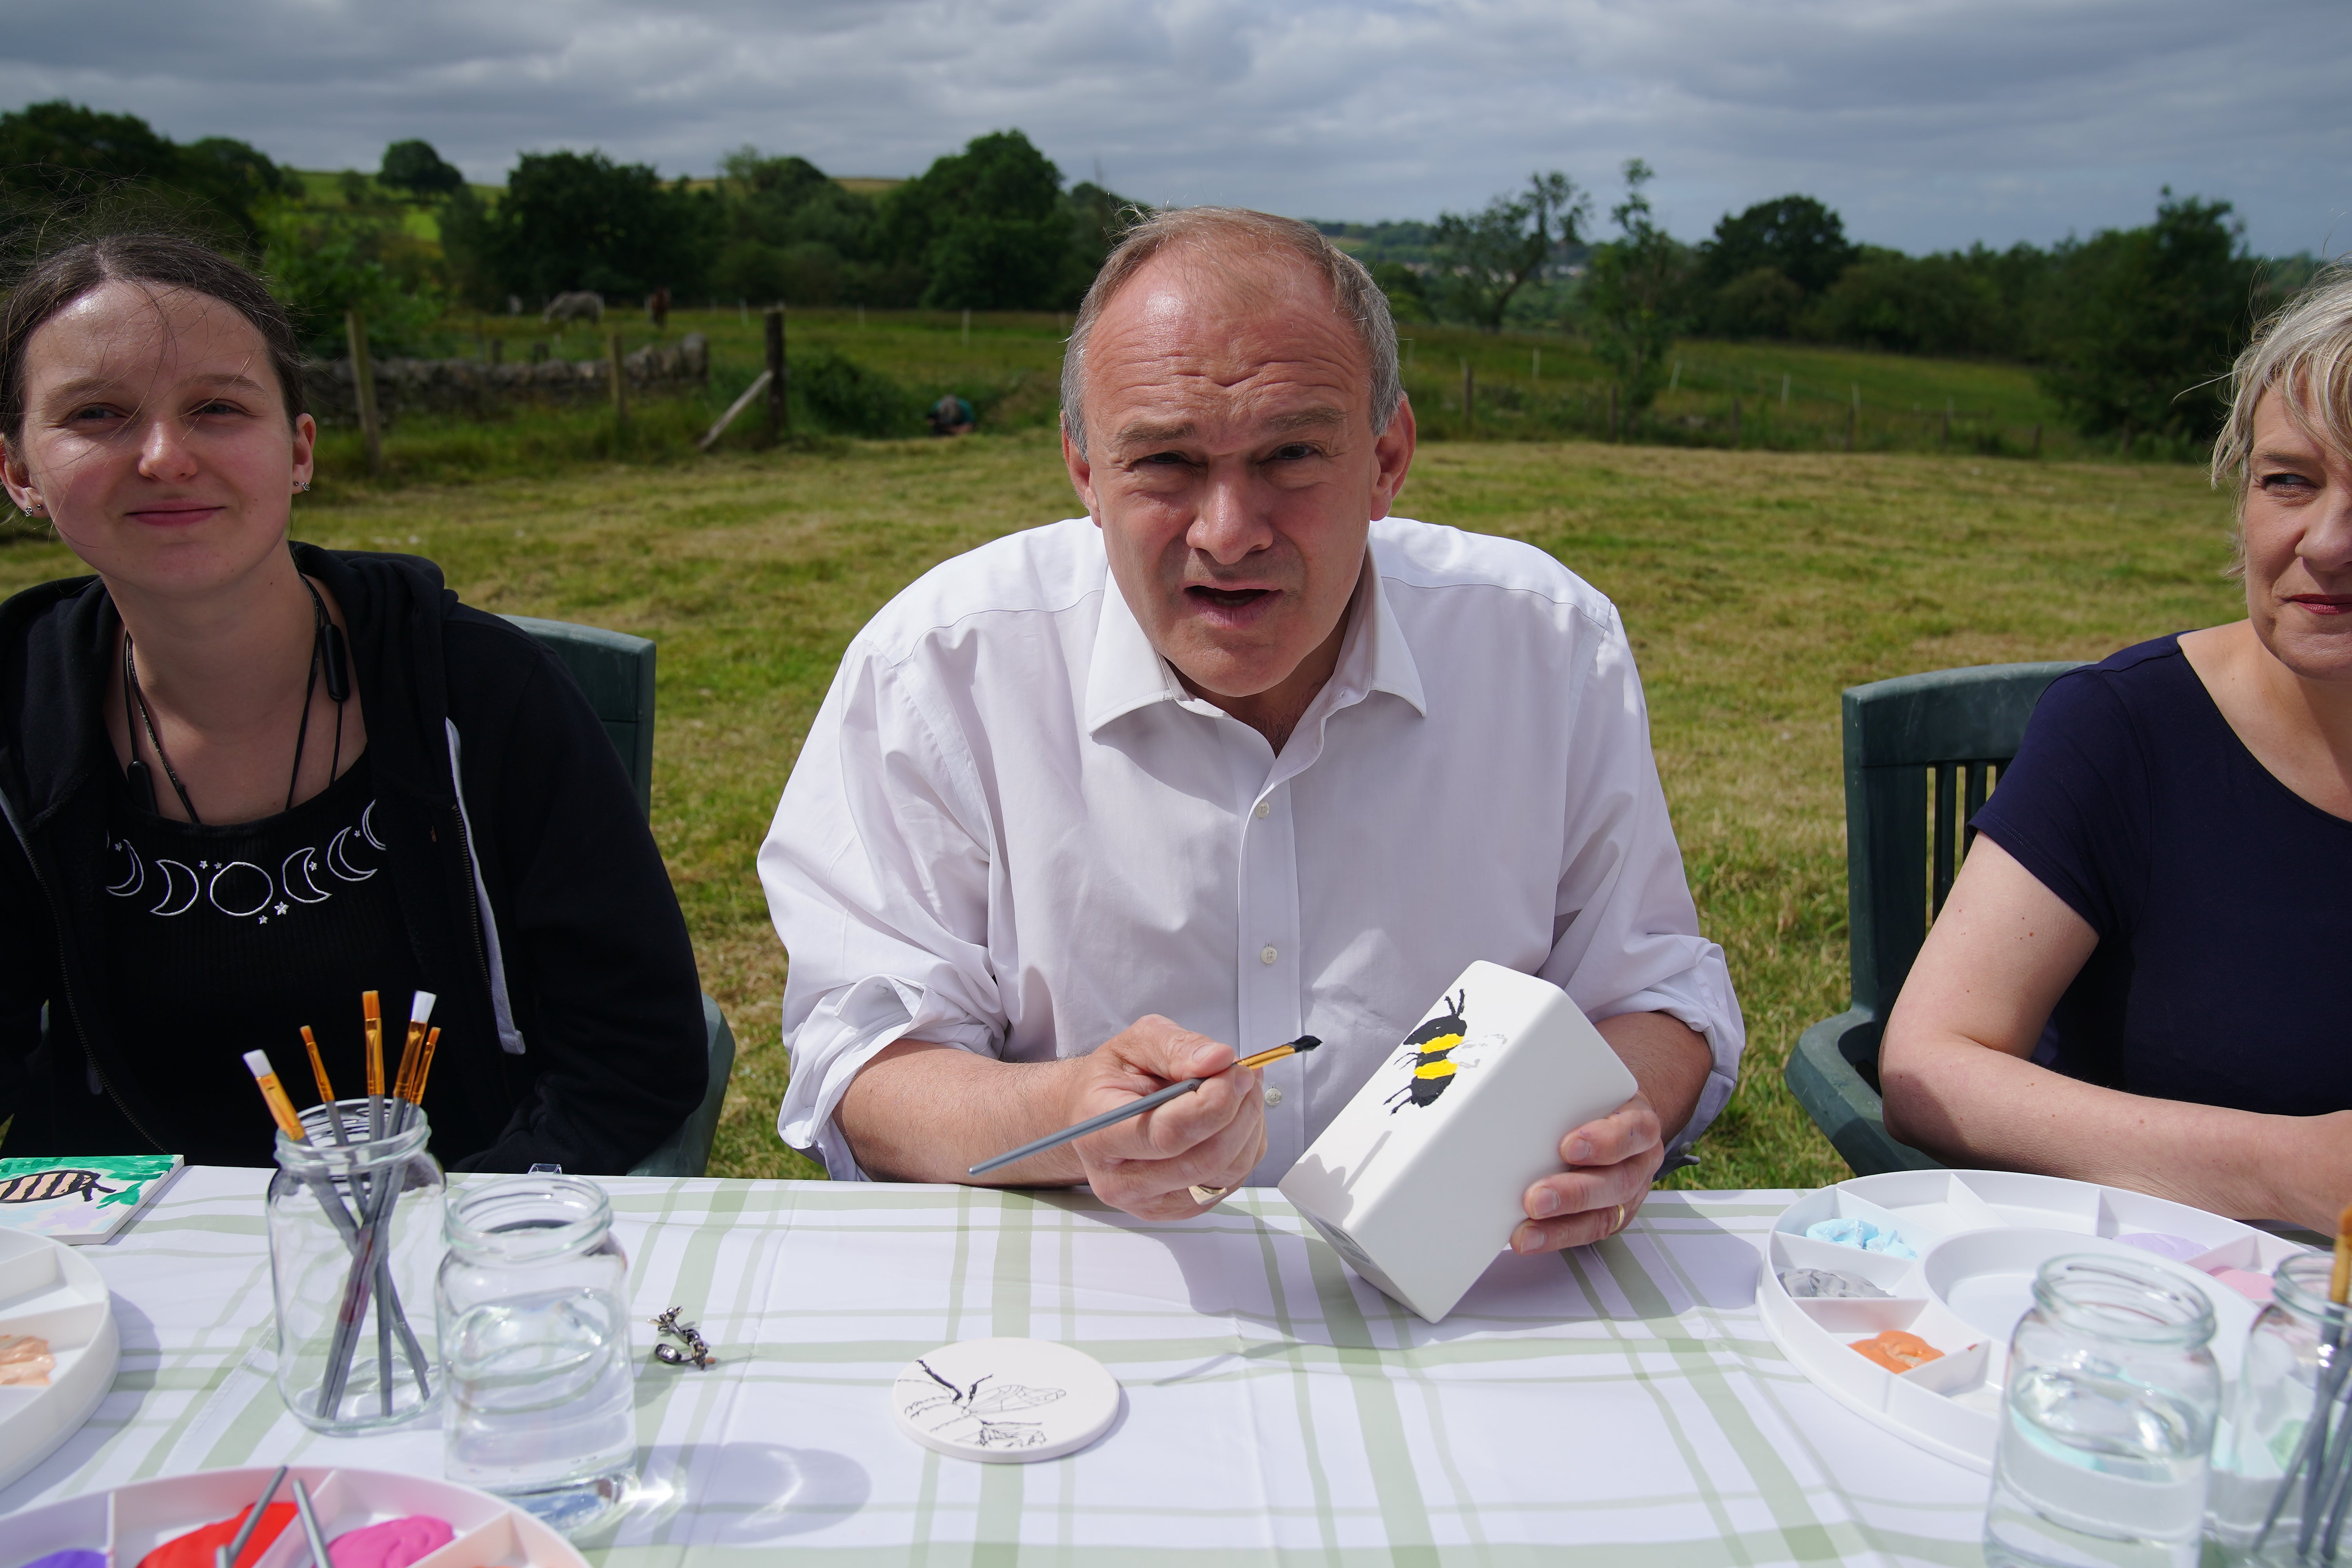 Lib Dem leader Sir Ed Davey has admitted to having ‘the odd flutter’ on politics (Peter Byrne/PA)